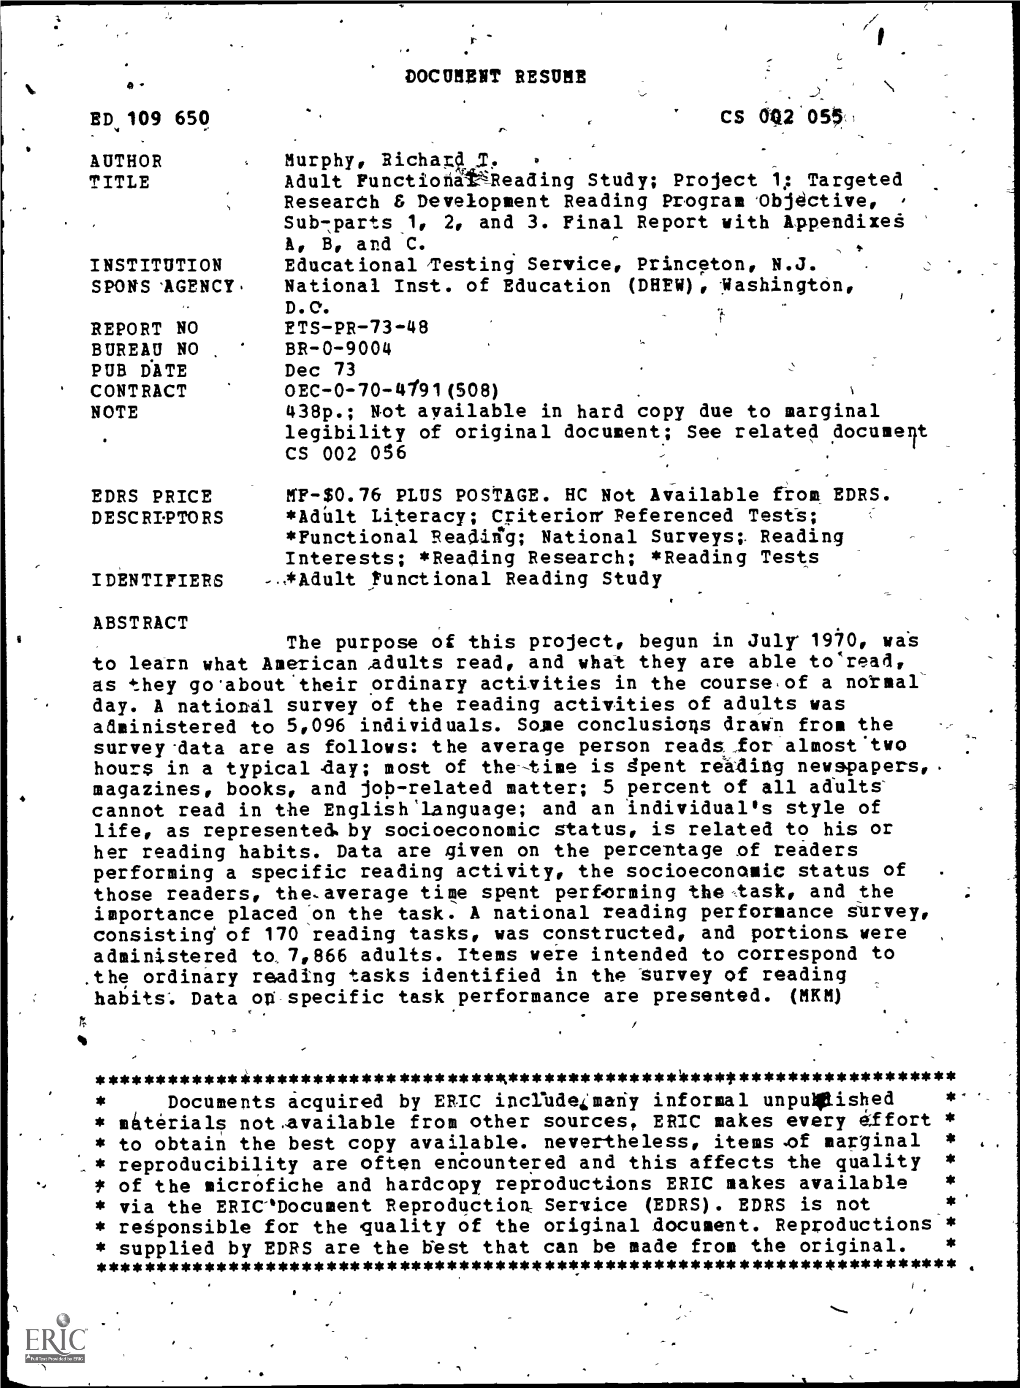 DOCUMENT RESUME Sub7parts 1, 2, and 3. Final Report with Appendixeg Educational Testing Service, Princeton, N.J. 438P.; Not Avai